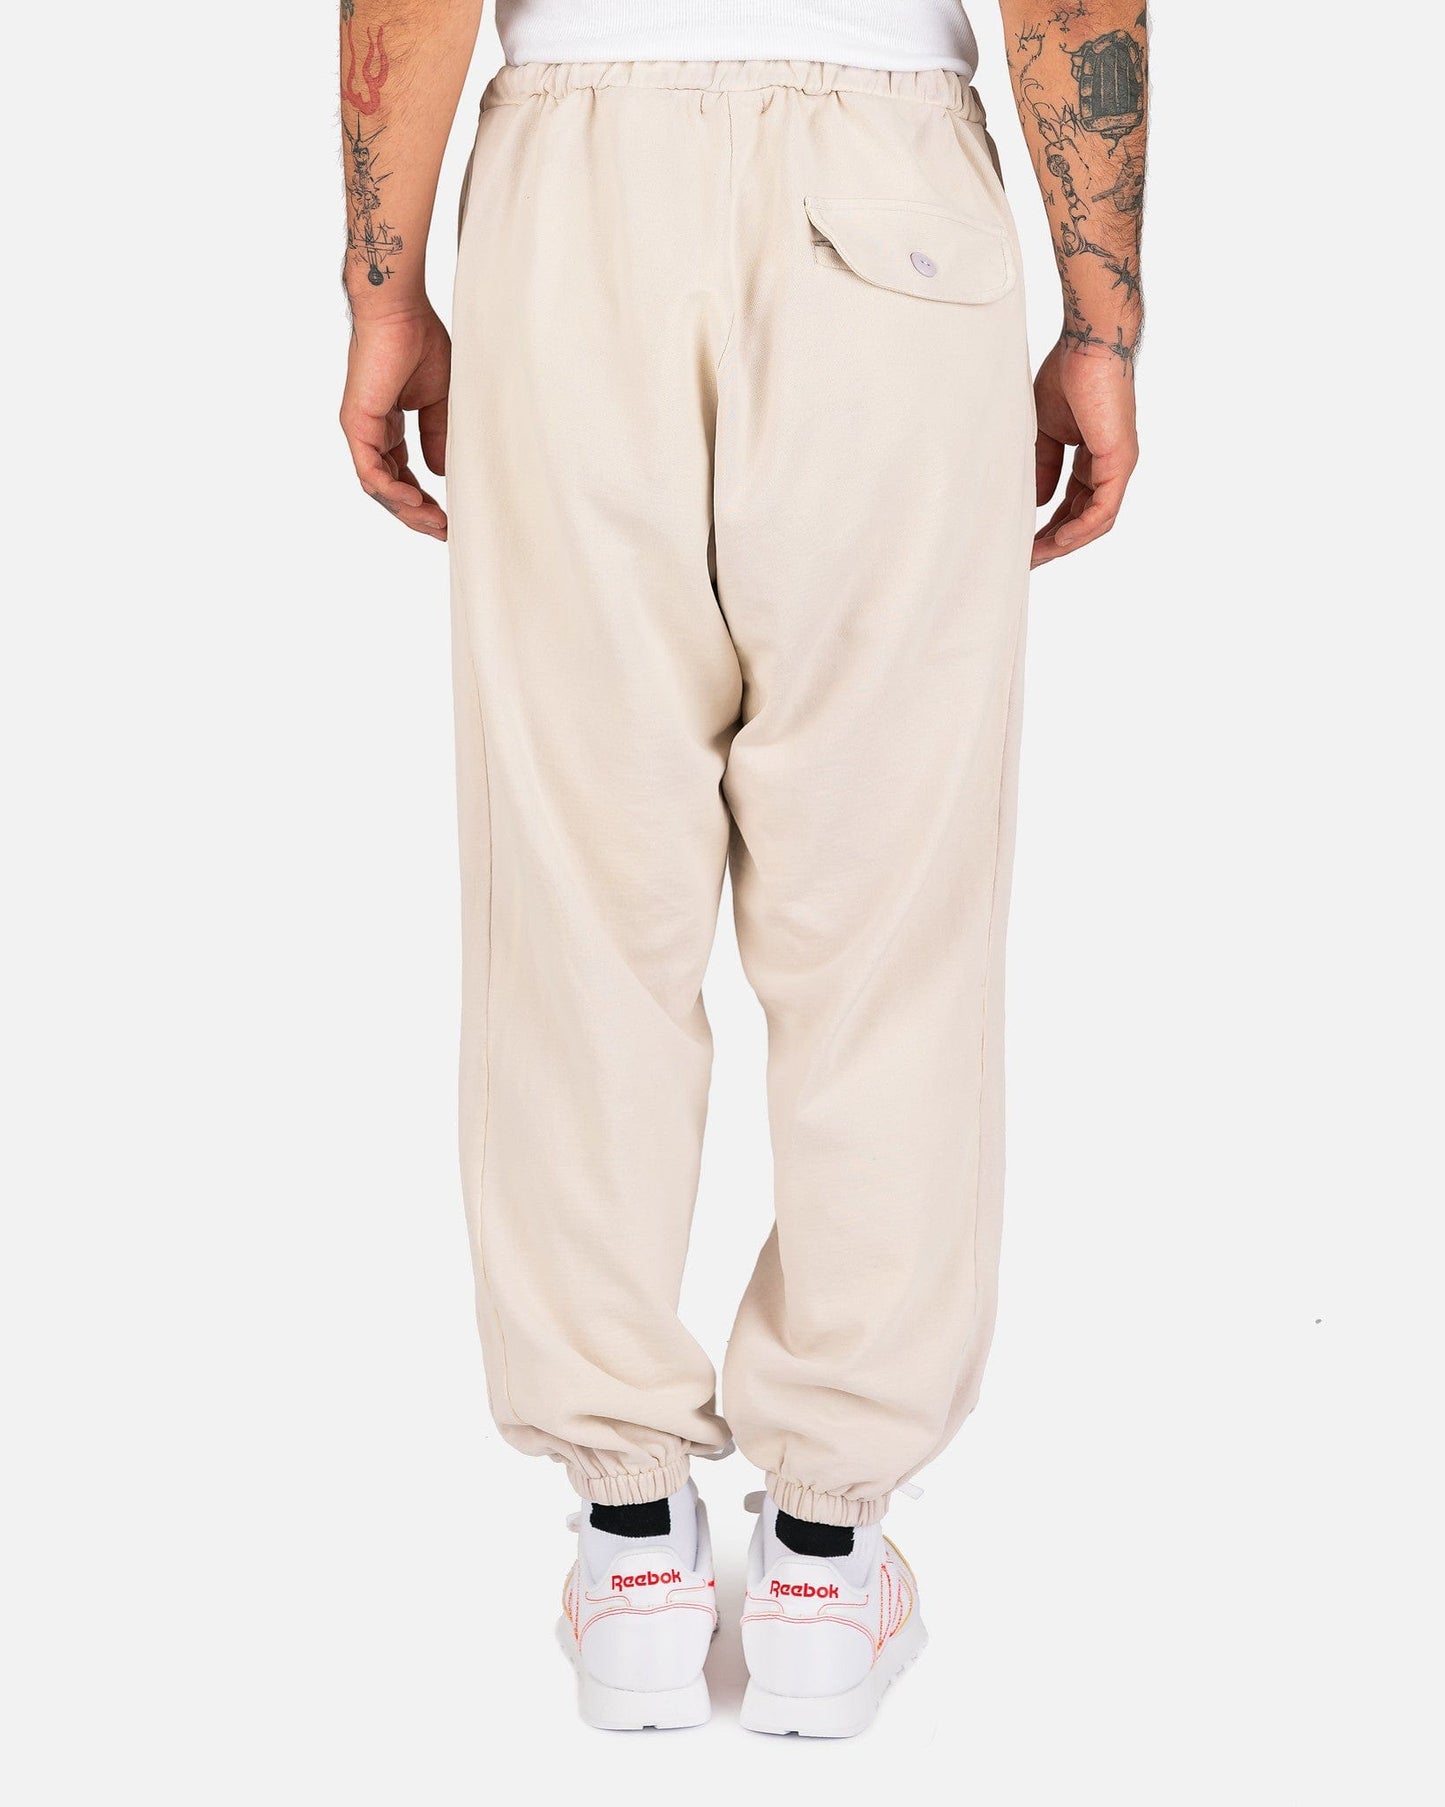 Willy Chavarria Men's Pants Big Daddy Sweatpants in Dorian Gray